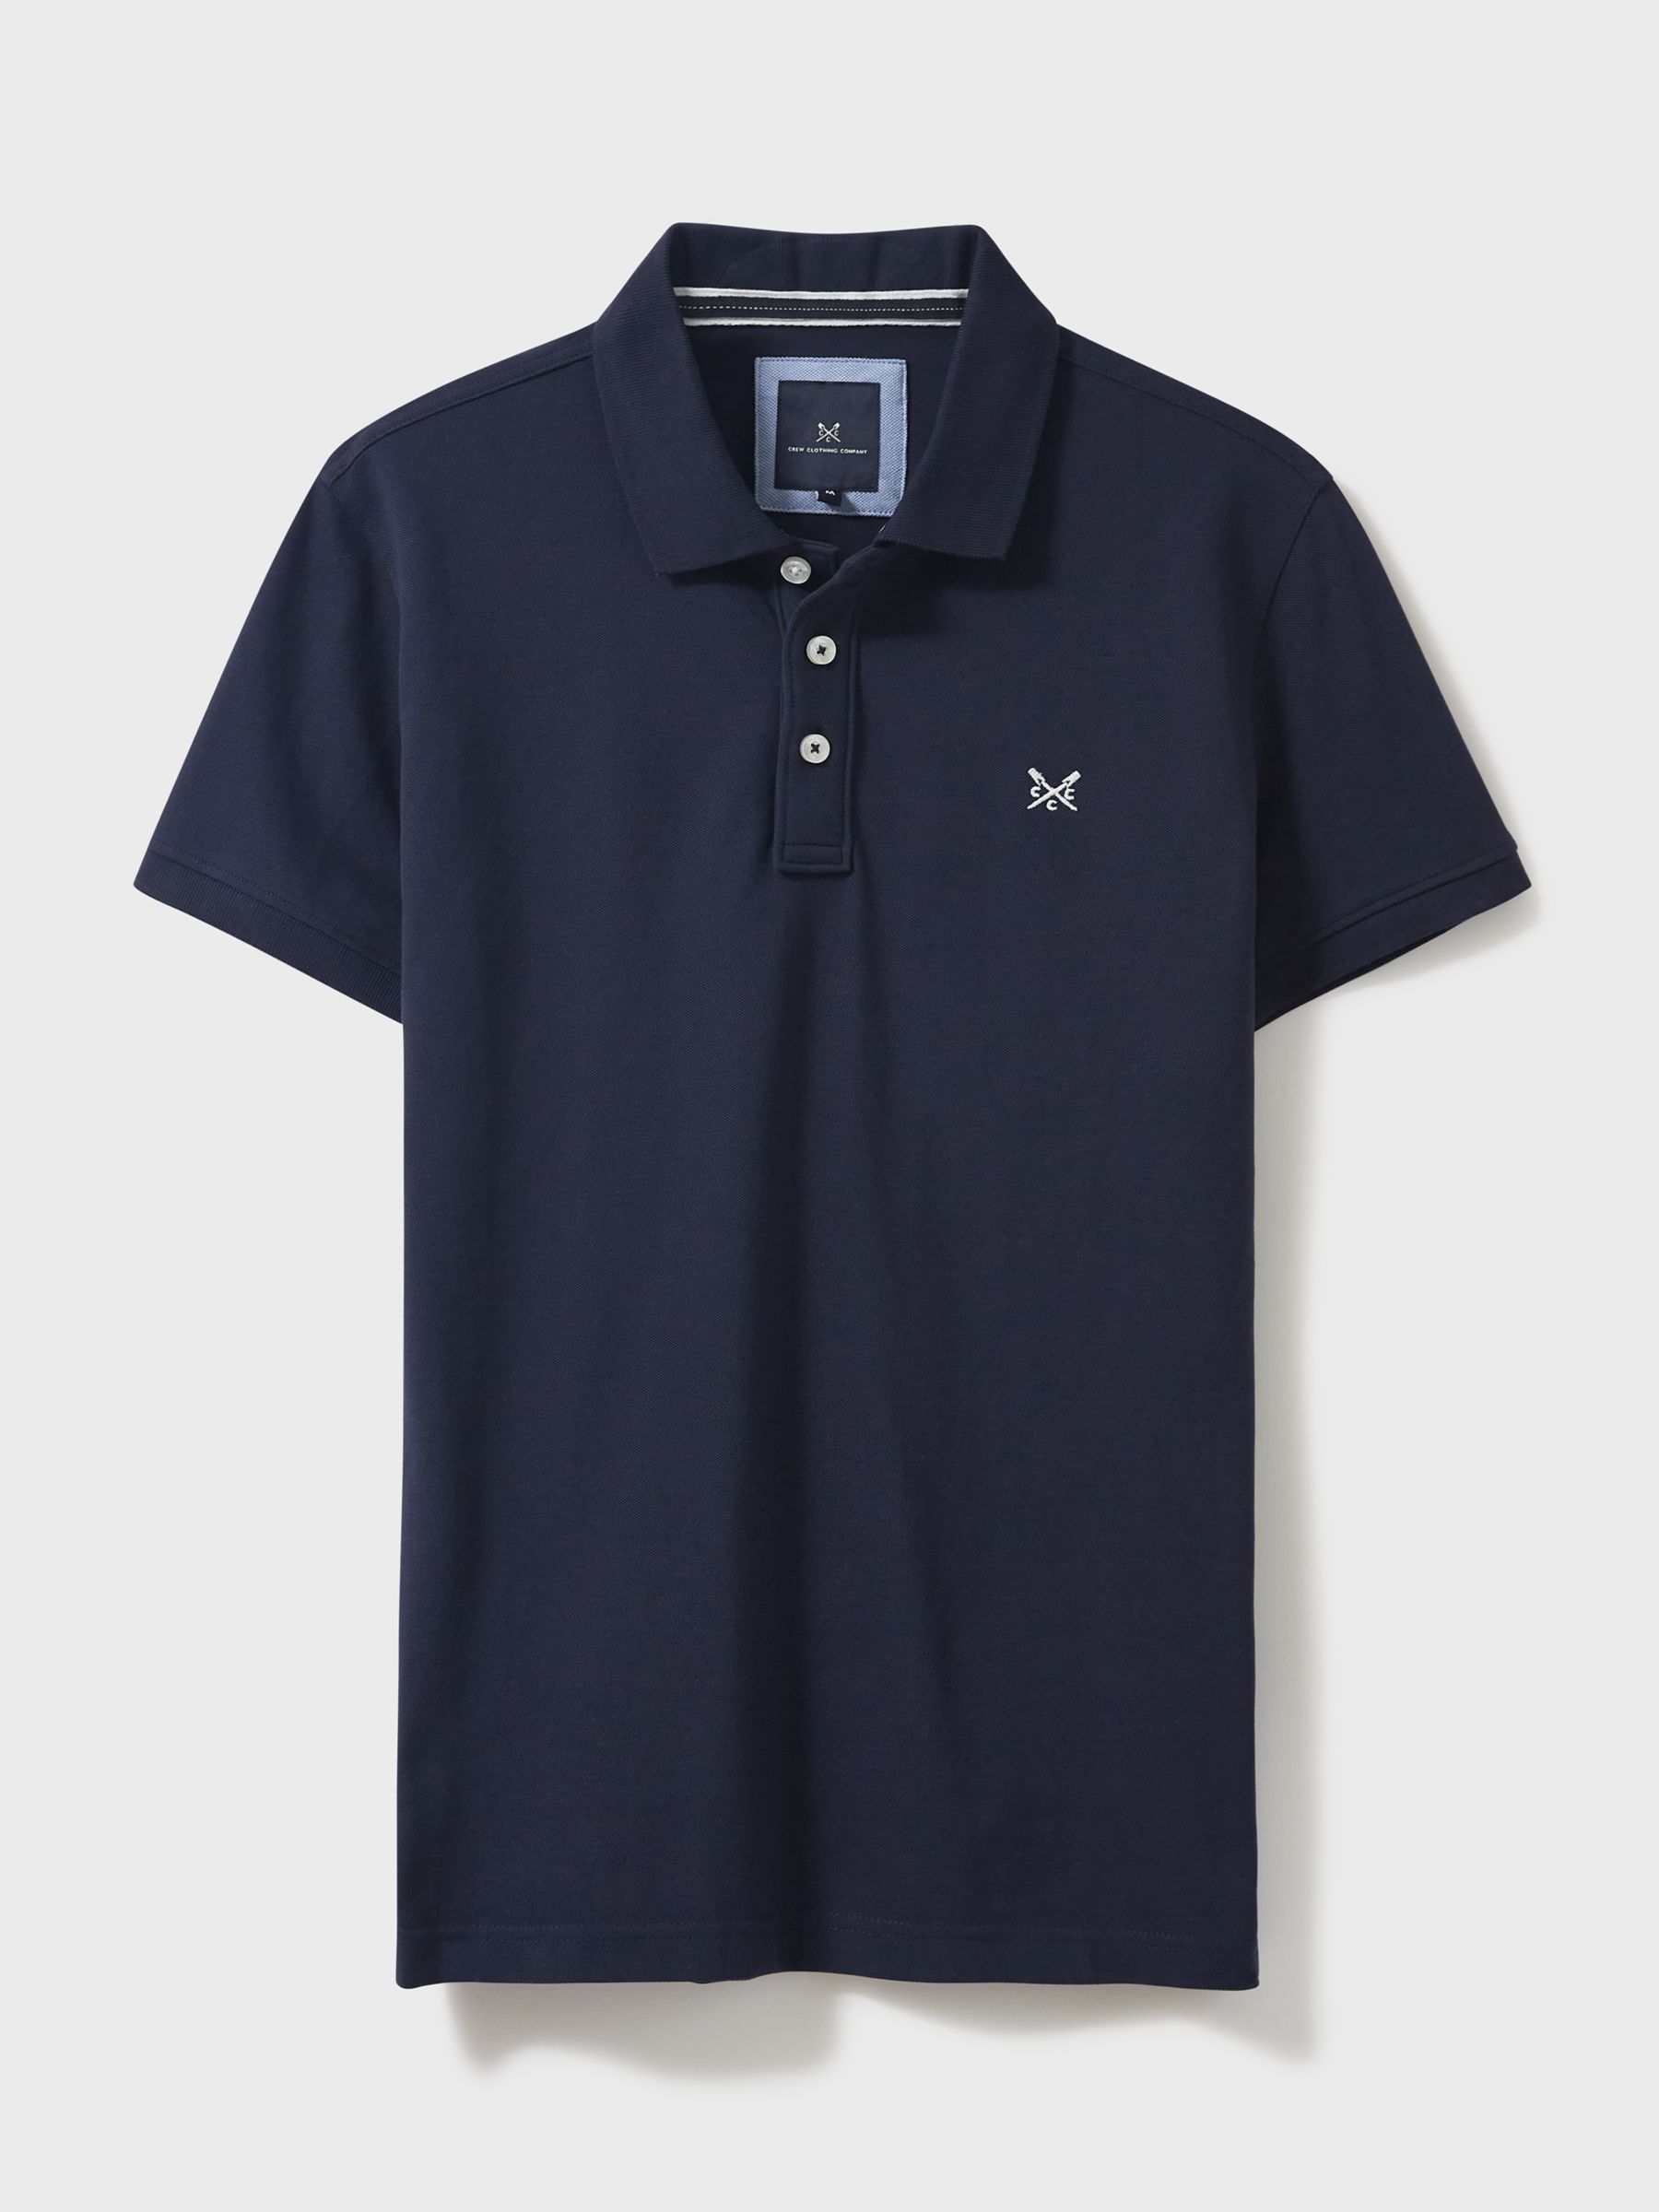 Crew Clothing Stretch Pique Polo Shirt, Navy Blue at John Lewis & Partners